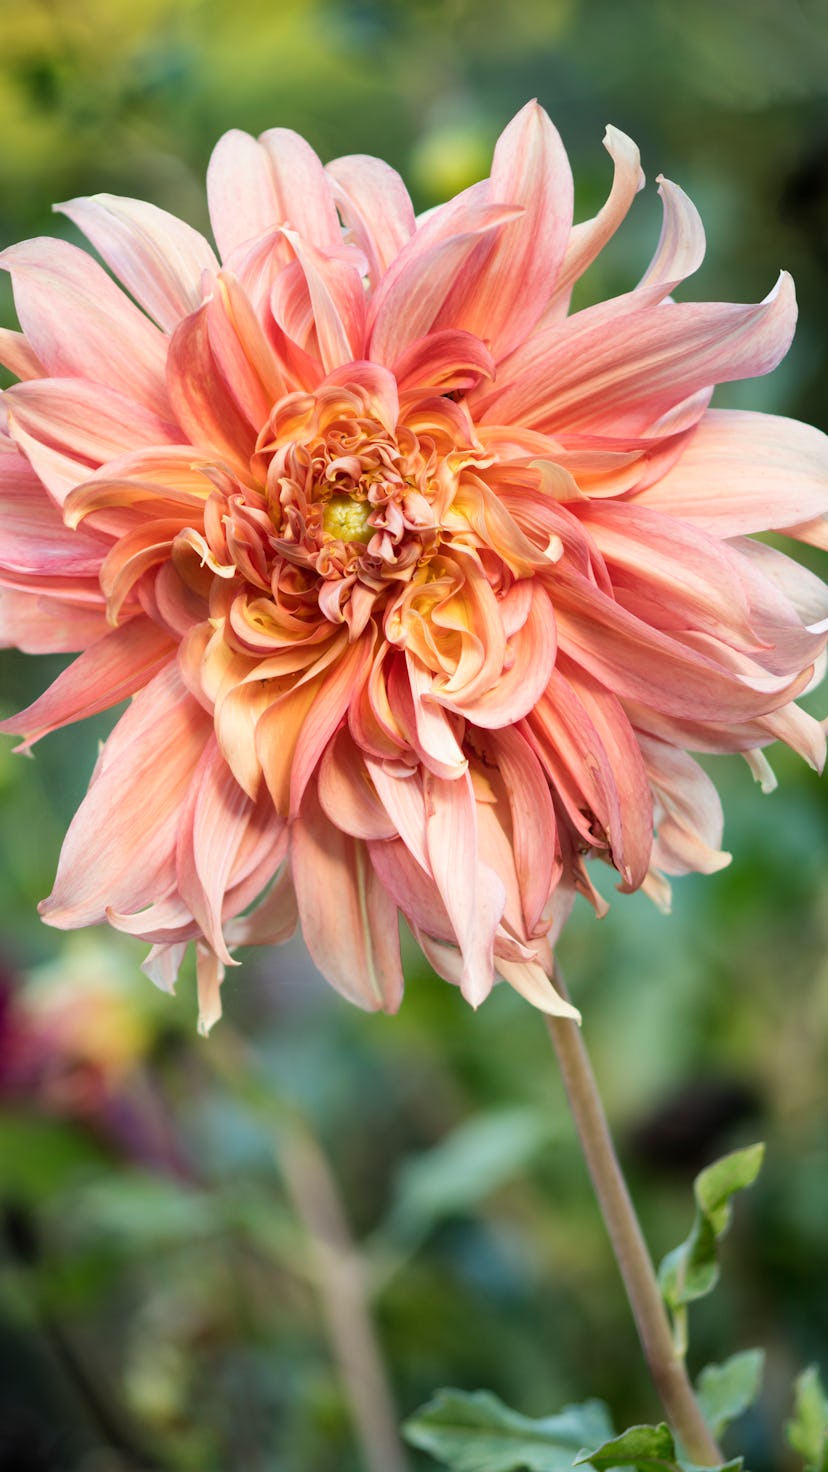 Vibrant garden dahlias in bloom. How to plant and grown dahlias.